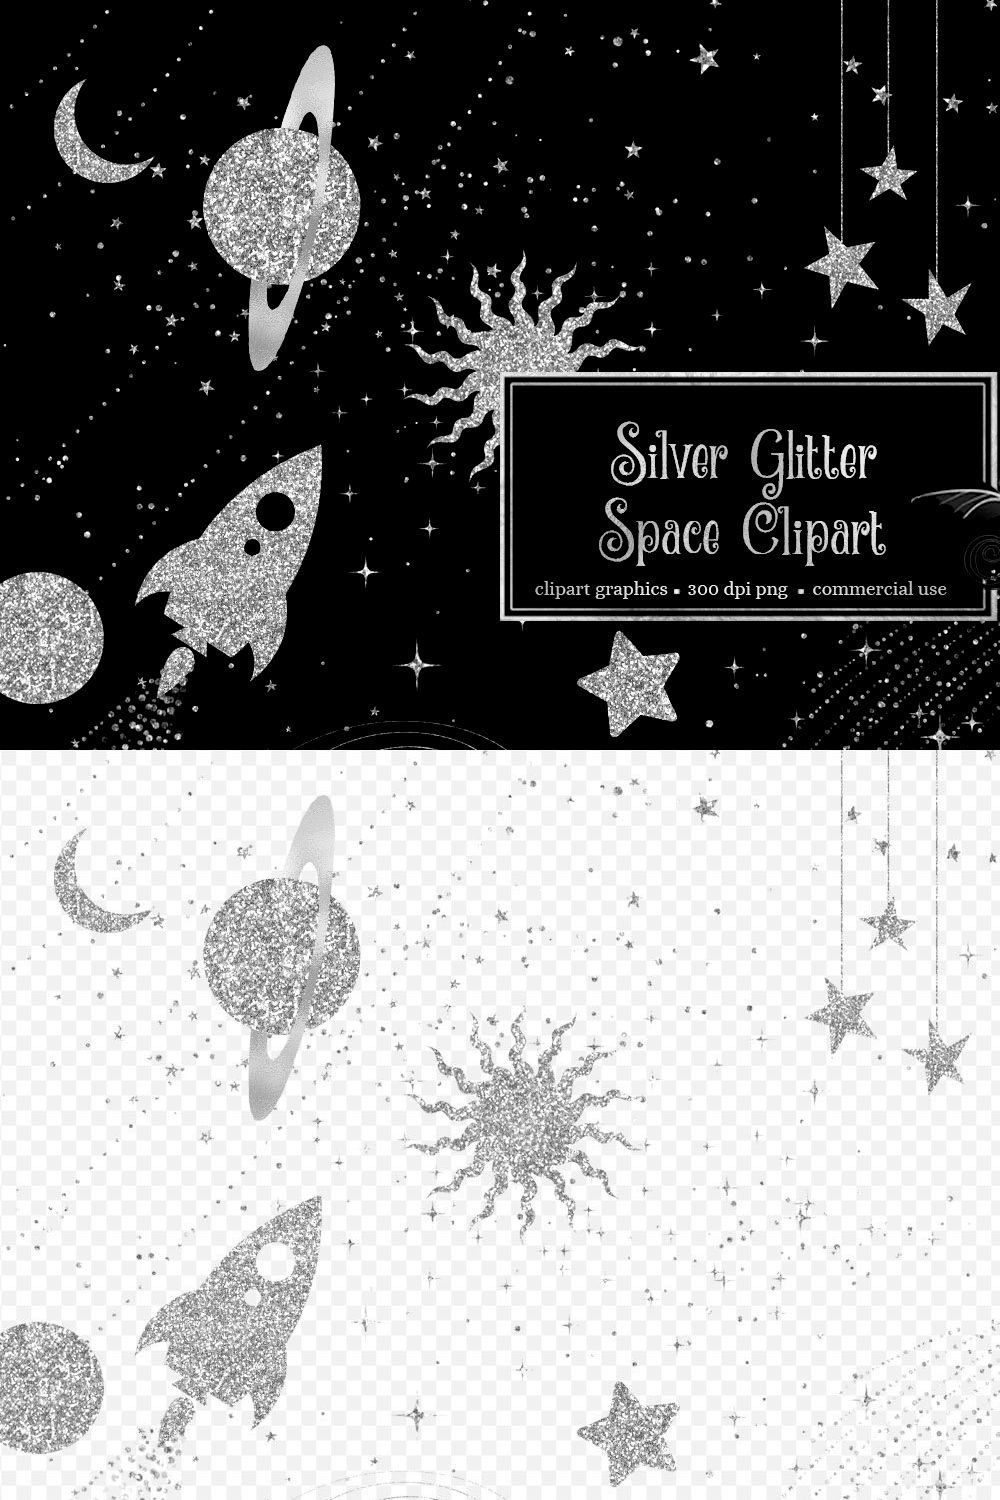 Silver Glitter Space Clipart pinterest preview image.